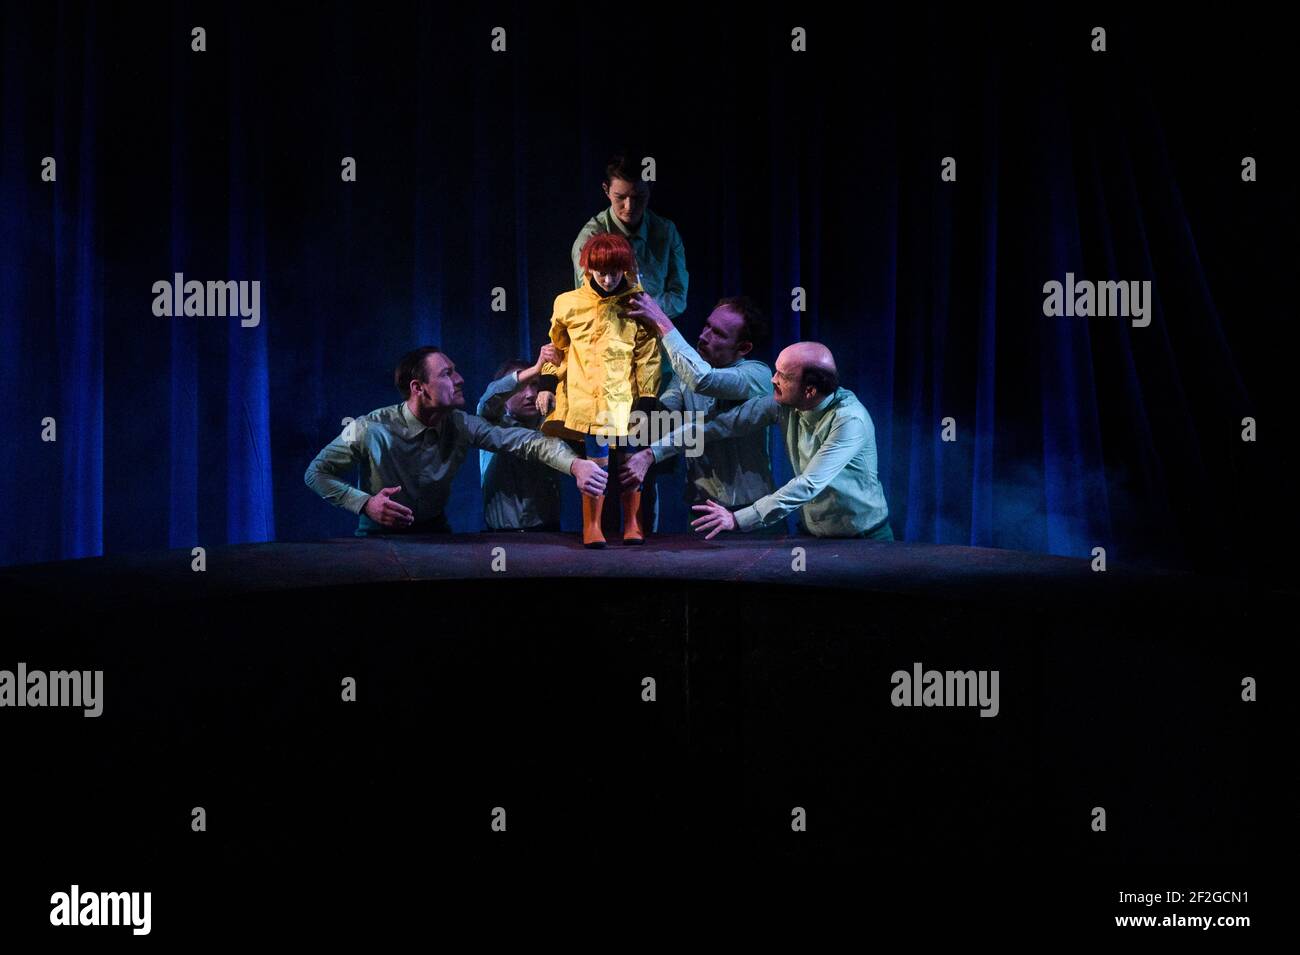 12 March 2021, Saxony-Anhalt, Magdeburg: Richard Barborka (l-r), Jana Weichelt, Freda Winter, Lennart Morgenstern and Florian Kräuter play the puppet Hauke Haien at the Puppentheater Magdeburg during the dress rehearsal of the play 'Der Schimmelreiter'. In its series of livestreams, the Puppentheater Magdeburg is performing a play for adults for the first time this weekend. The focus is on the ambitious and egotistical Hauke Haien, who rises from humble beginnings to become a dike count. It is the fifth play to be shown via livestream. According to the theatre, more than 3200 tickets for the l Stock Photo